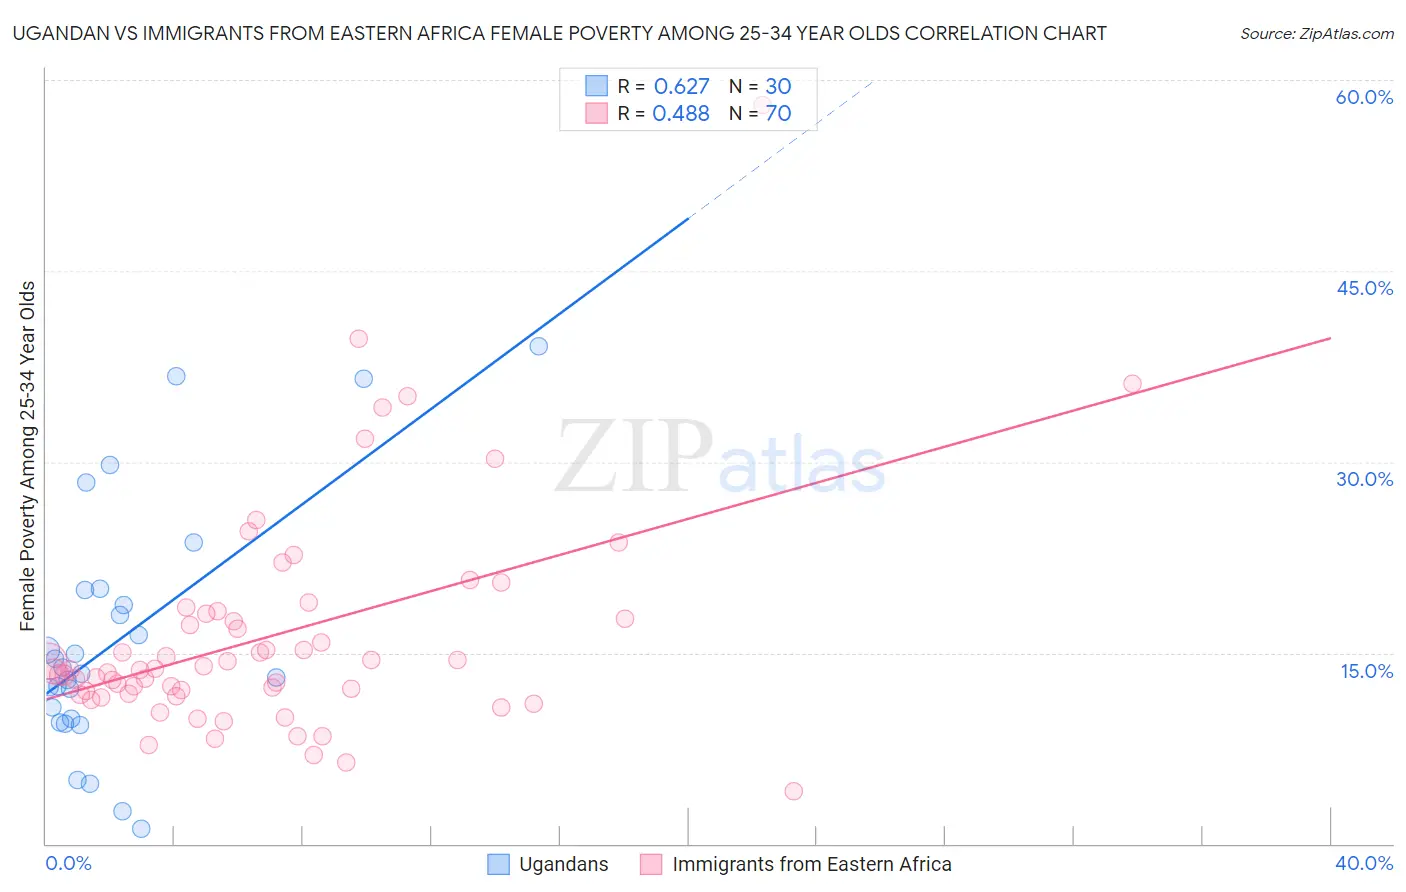 Ugandan vs Immigrants from Eastern Africa Female Poverty Among 25-34 Year Olds